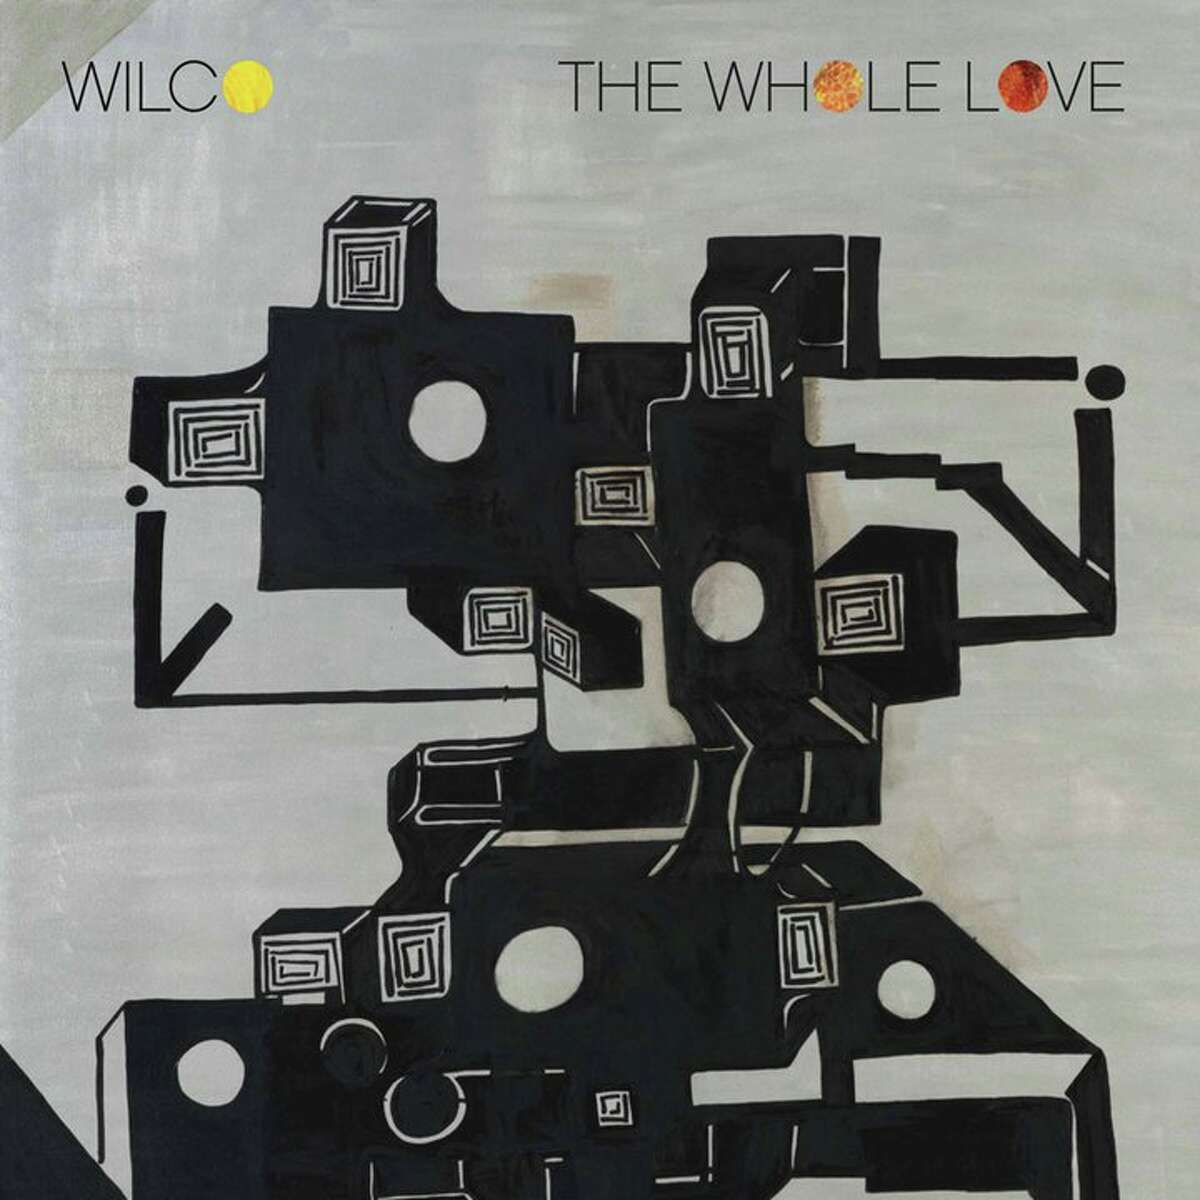 The Whole Love by Wilco ... dBpm Product Details Audio CD (September 27, 2011) Original Release Date: 2011 Number of Discs: 1 Label: dBpm/ANTI ASIN: B005EHNEDO